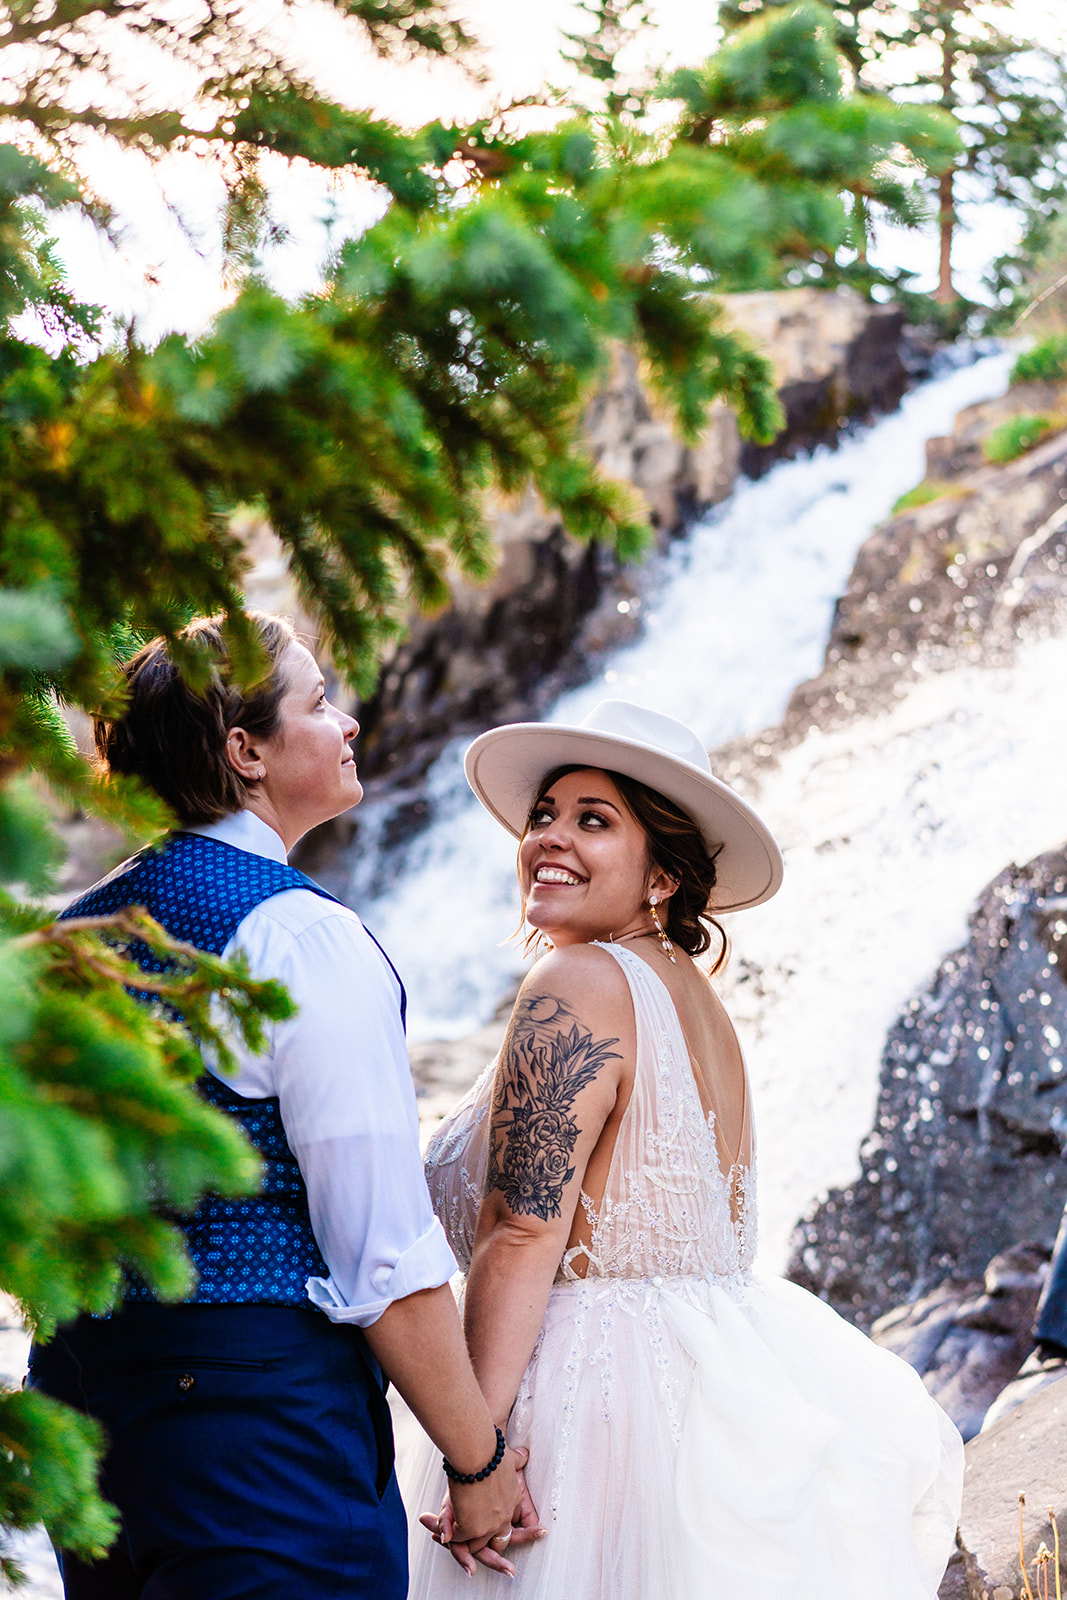 Bride smiling at her bride in front of a waterfall